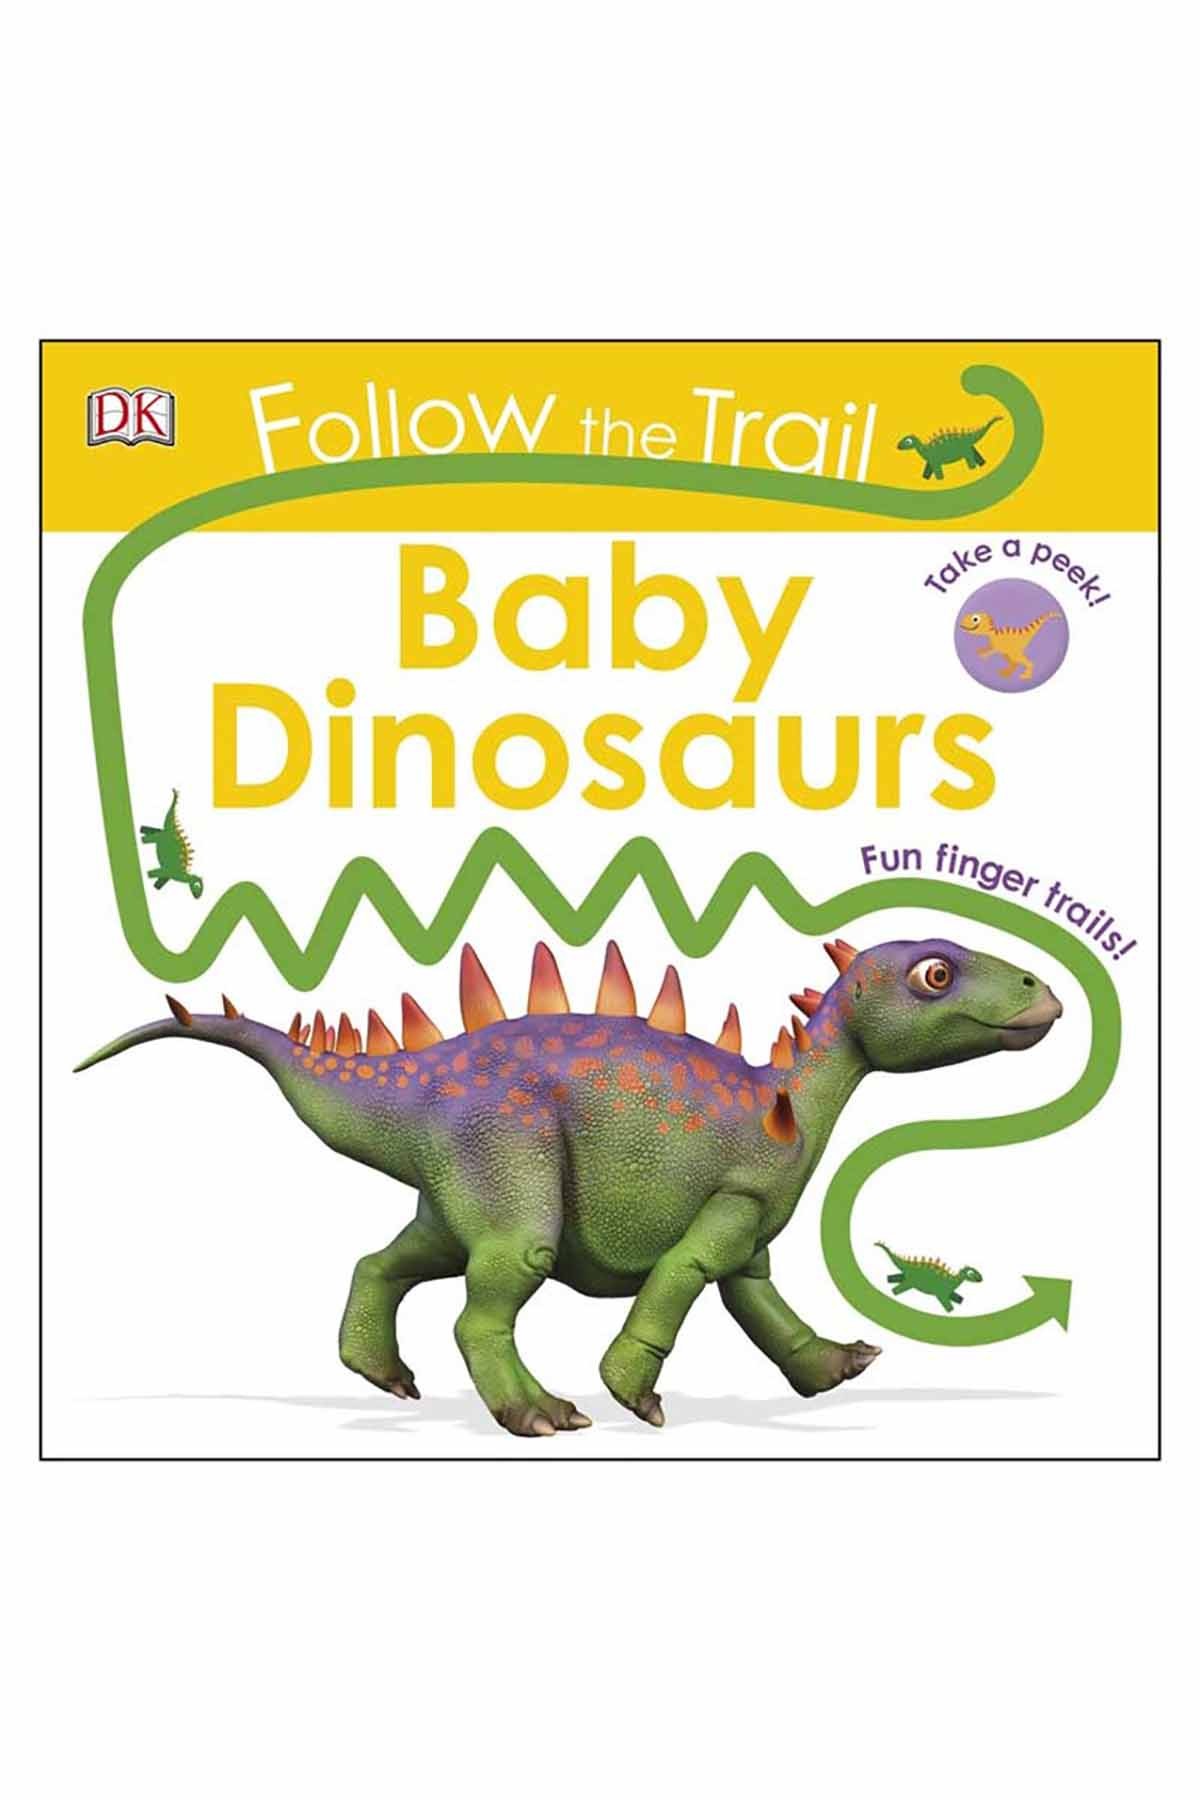 Follow the Trail Baby Dinosaurs